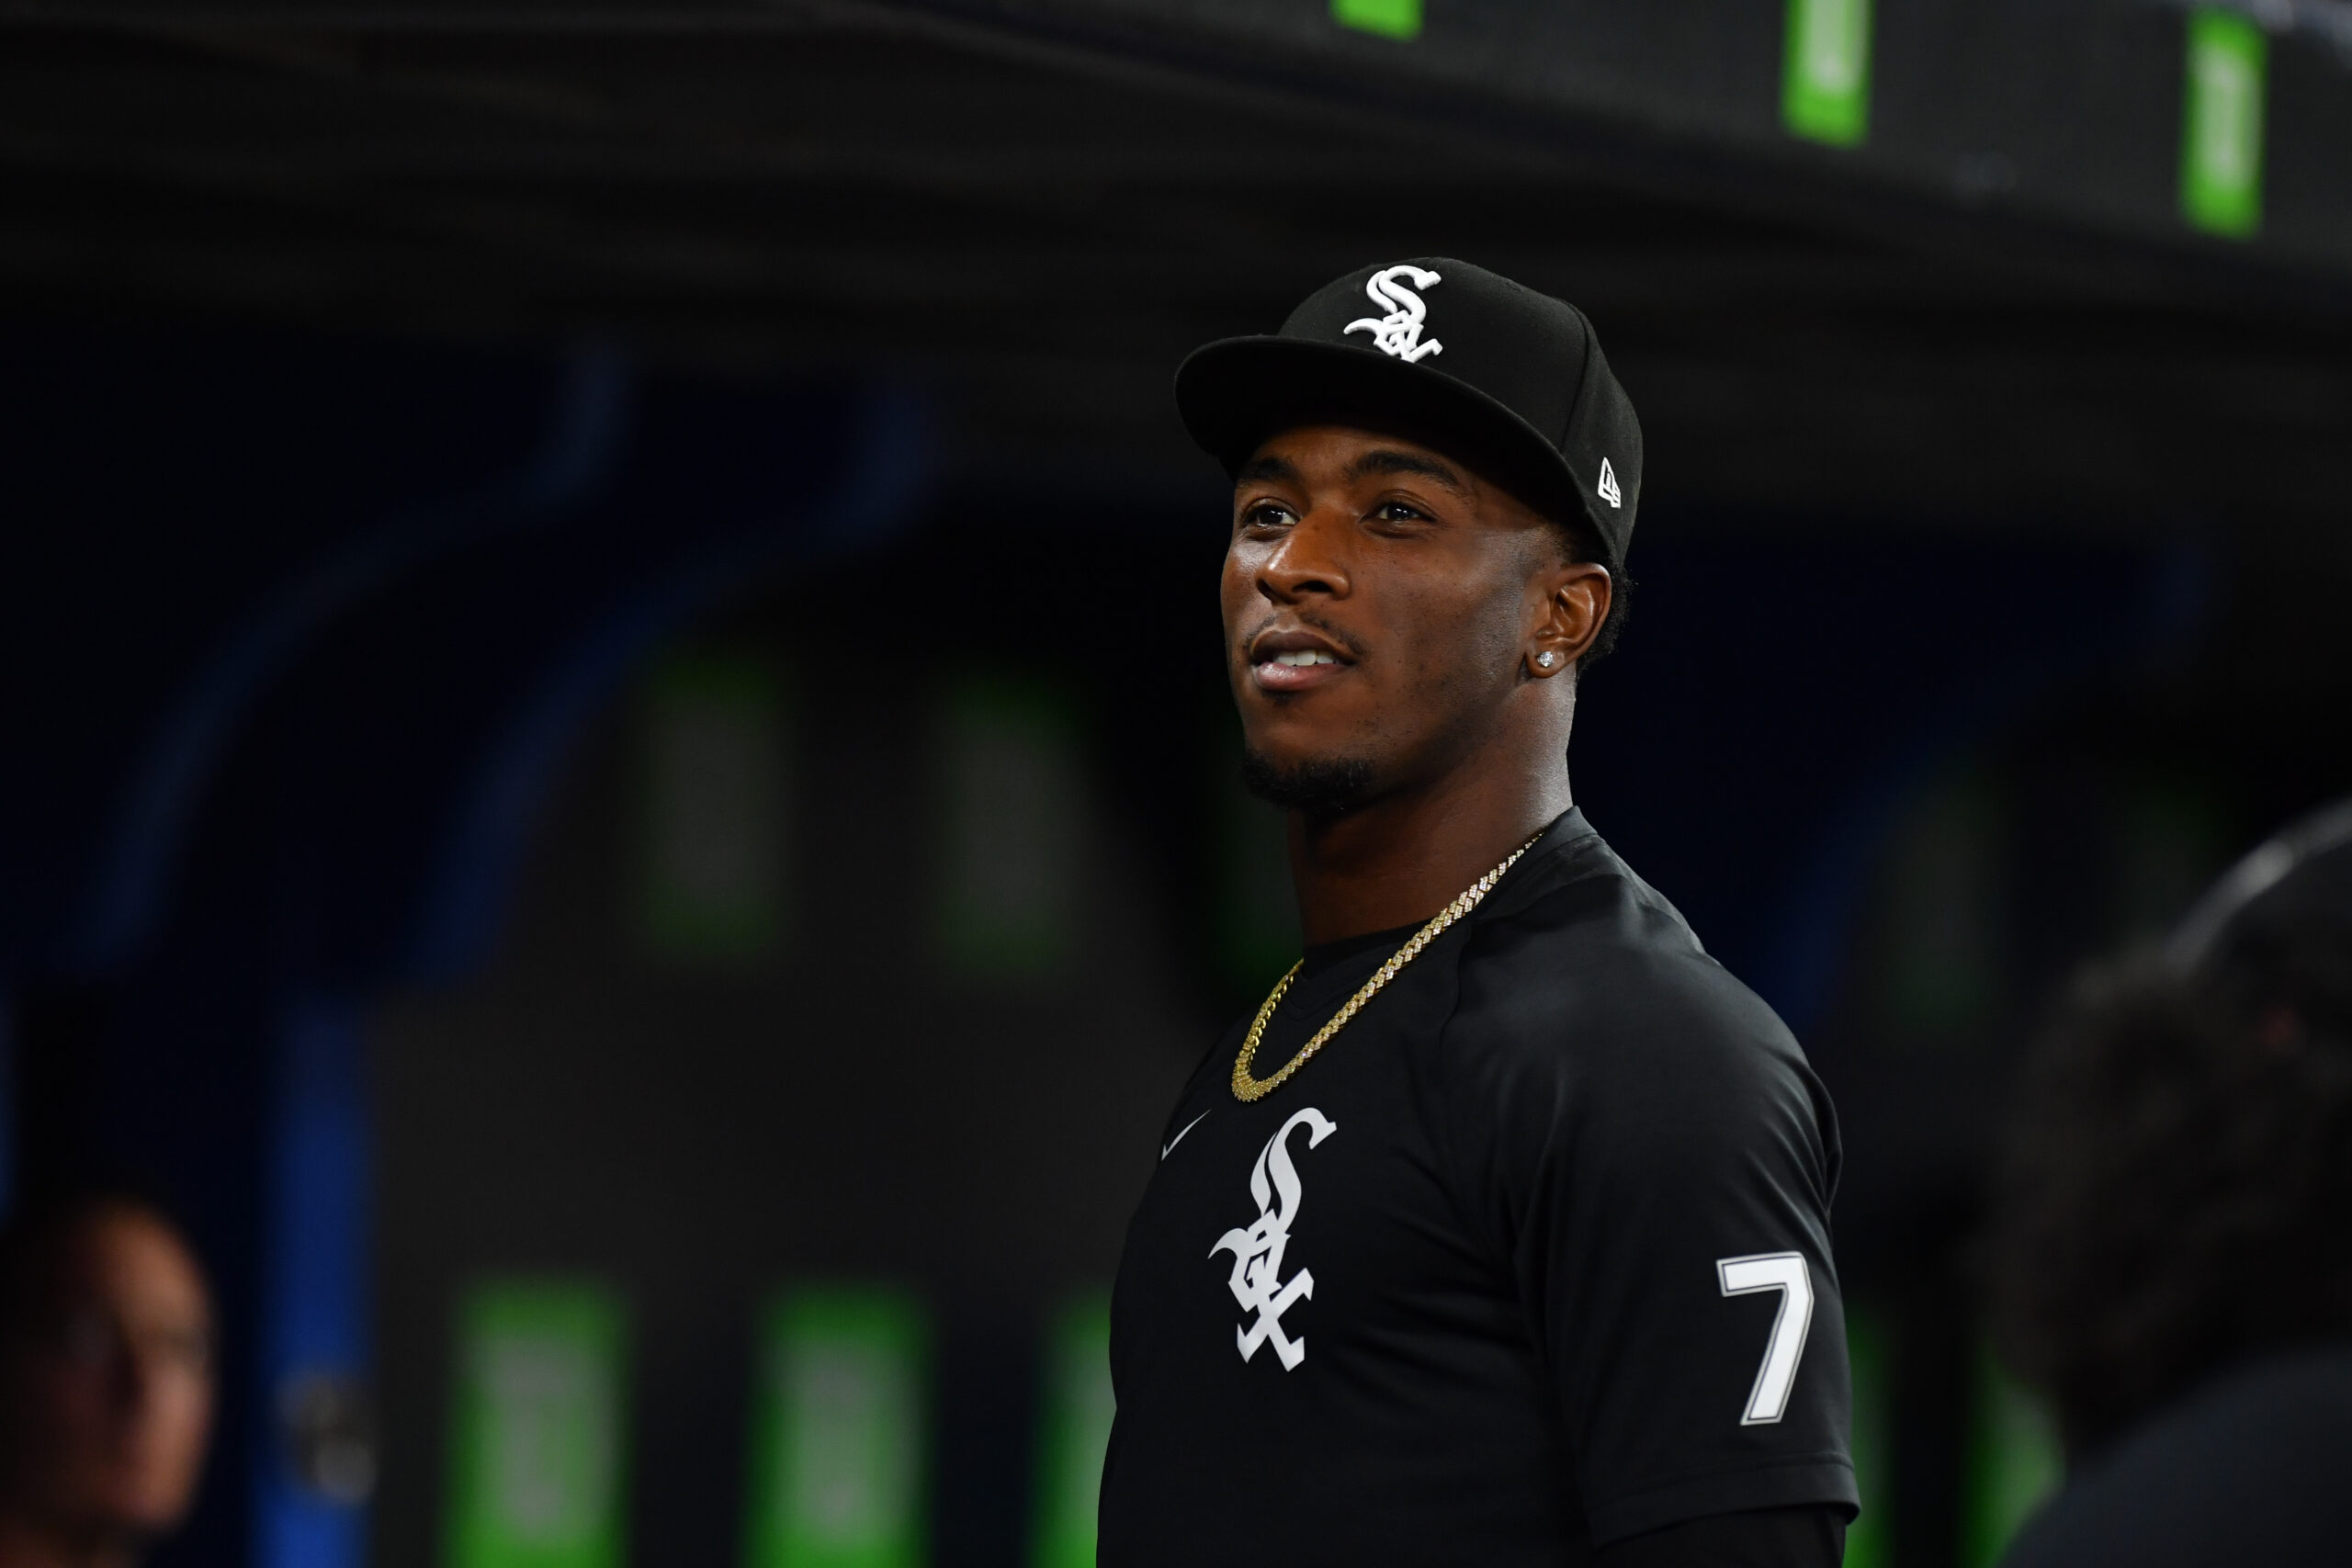 Tim Anderson's family is growing